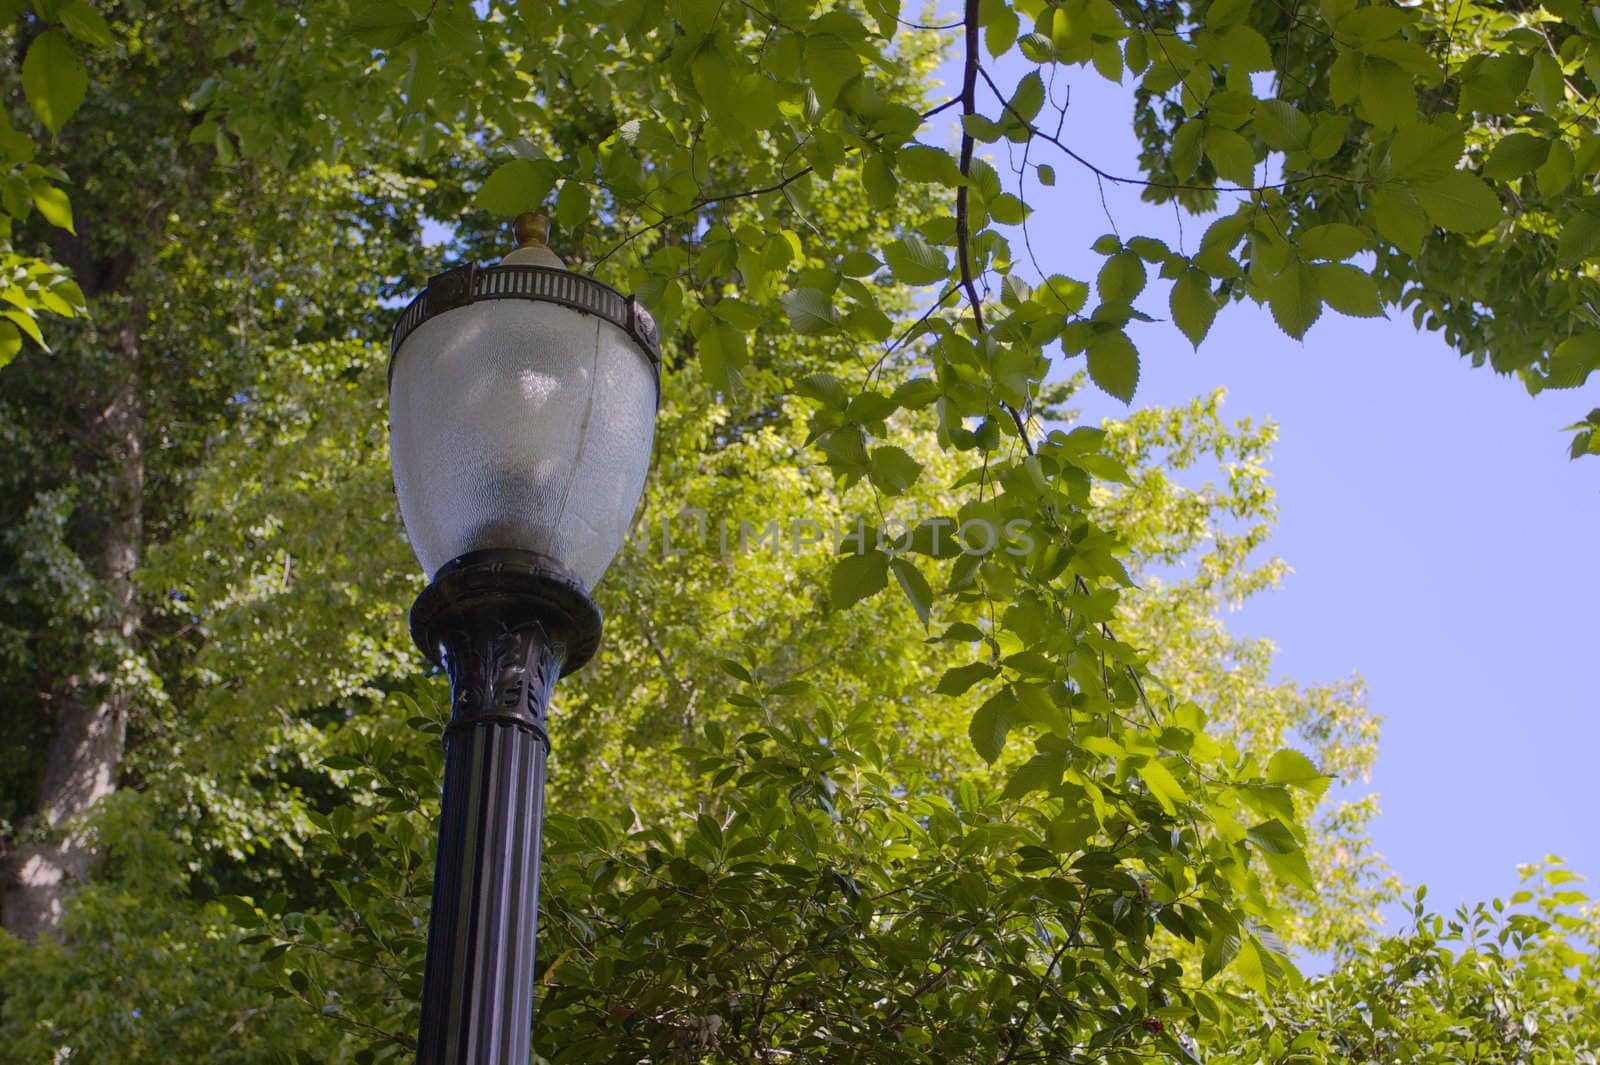 A single vintage lampost in California Capital Park with Trees in background